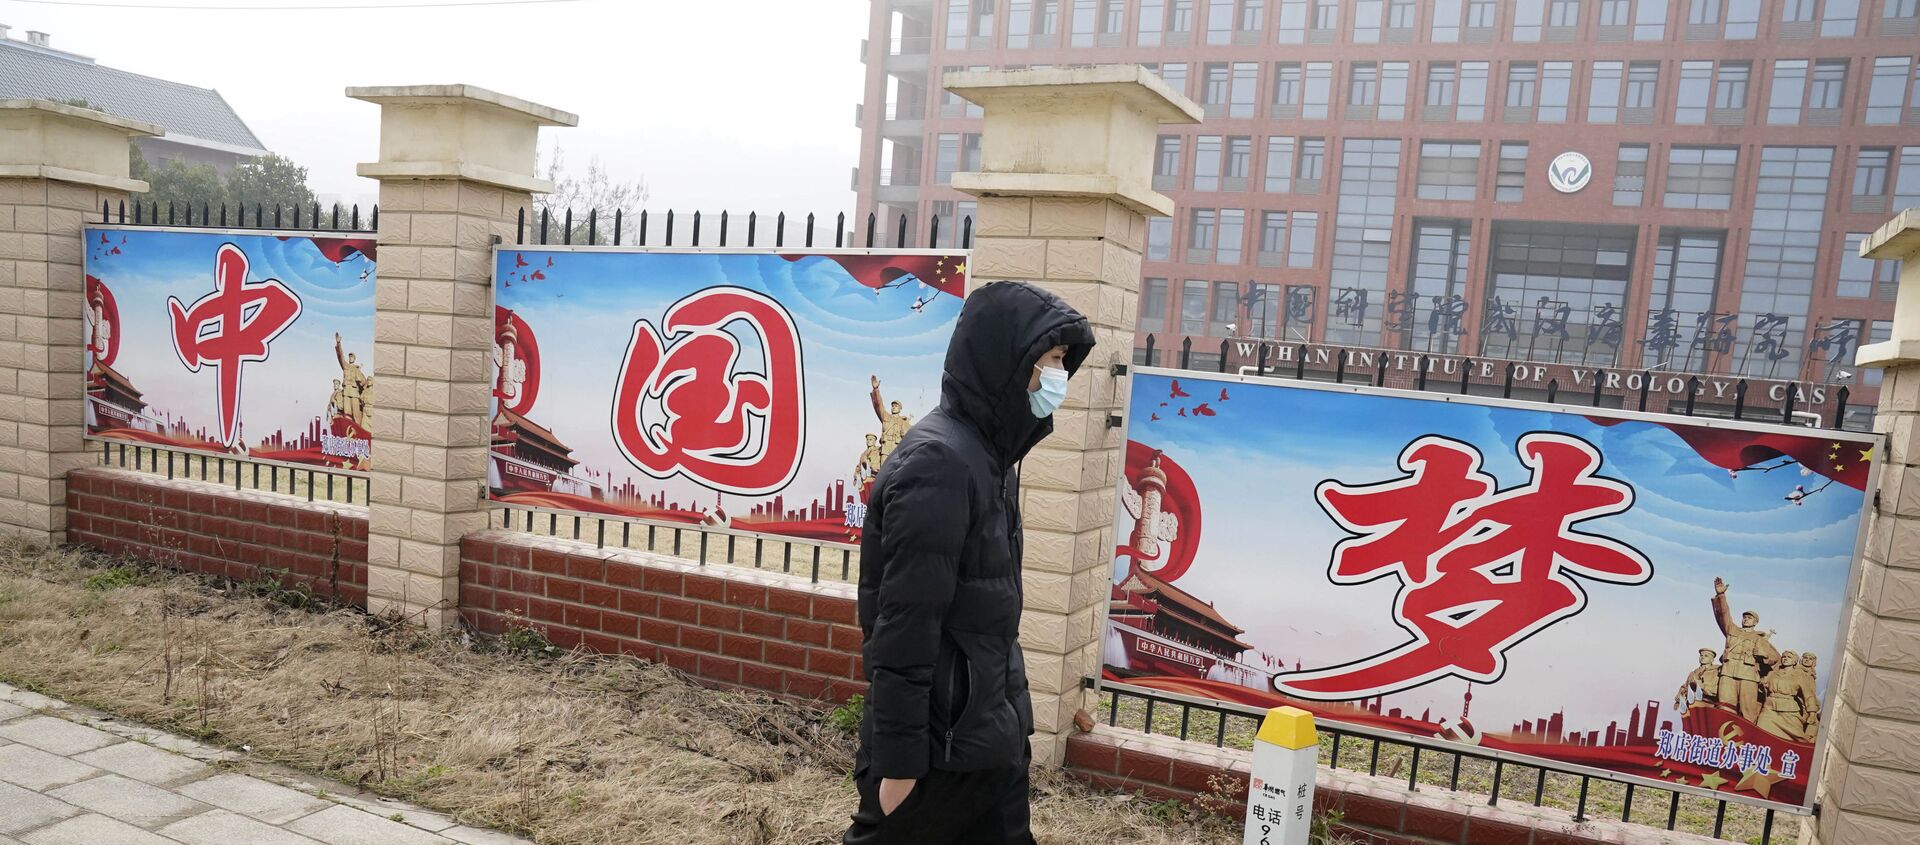 A man passes by the words China Dream outside the entrance to the Wuhan Institute of Virology during a visit by a World Health Organization team in Wuhan in China's Hubei province on Wednesday, Feb. 3, 2021 - Sputnik International, 1920, 16.07.2021